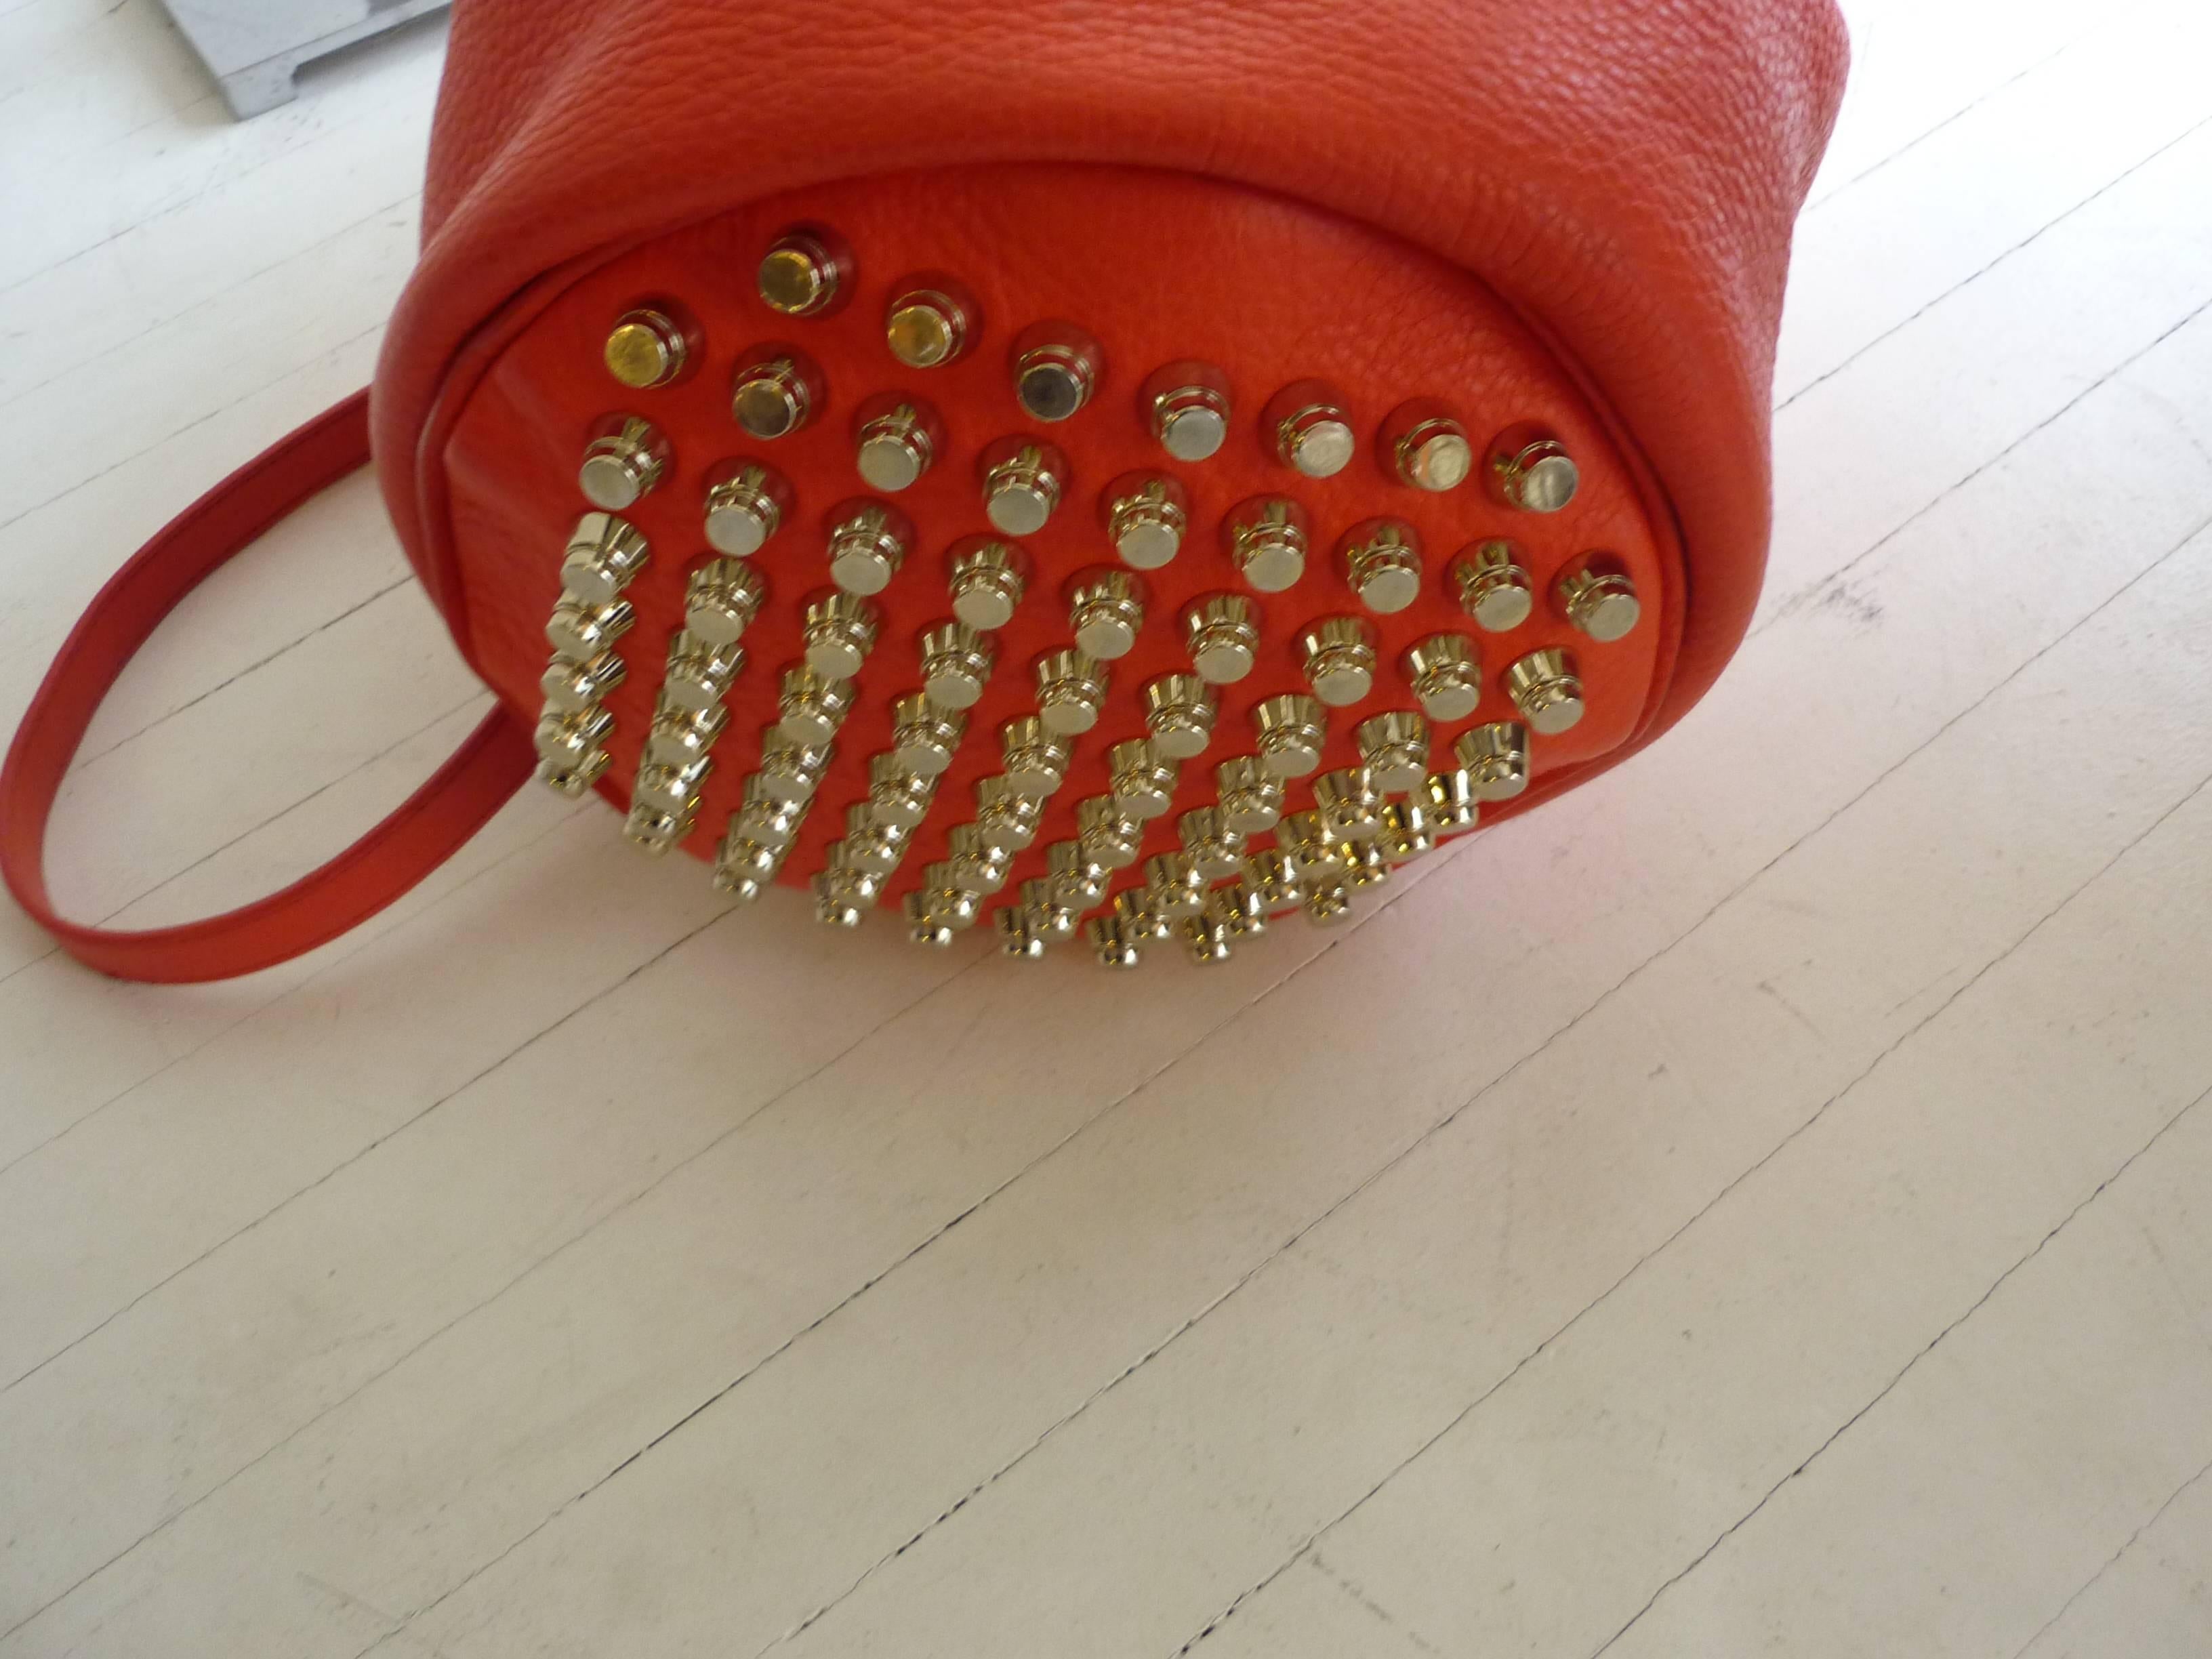 Lovely pre-owned condition, this bag is made of an orange/red pebbled leather. There is a top handle as well as an adjustable shoulder strap, and has a fully studded base as well as studding around the pleated front. 

There is an internal zipped